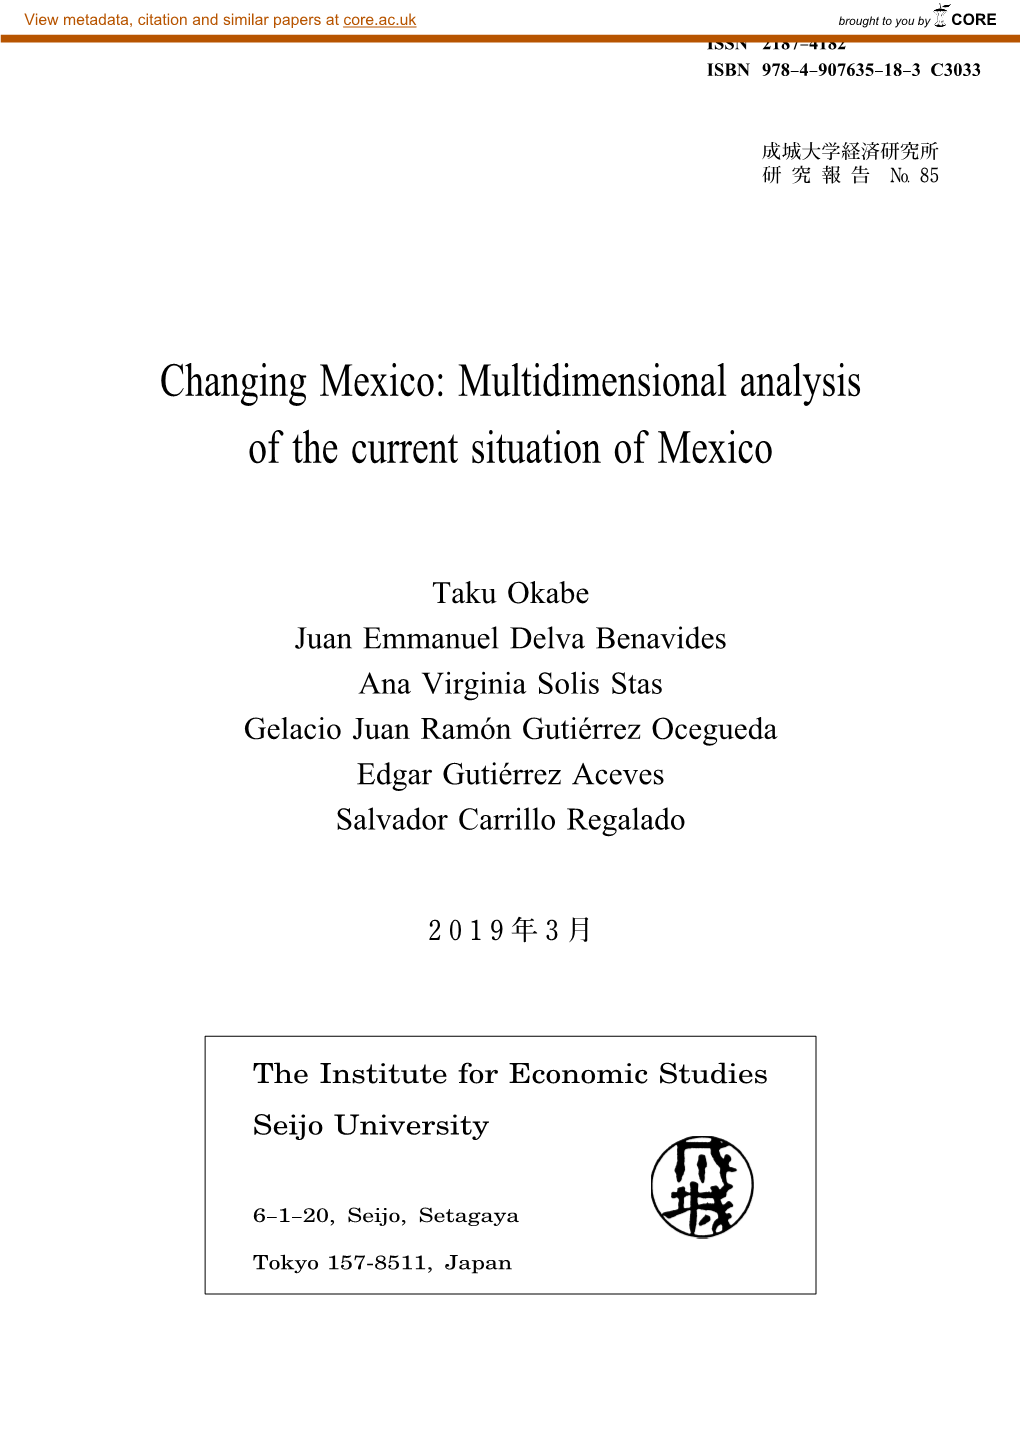 Changing Mexico: Multidimensional Analysis of the Current Situation of Mexico